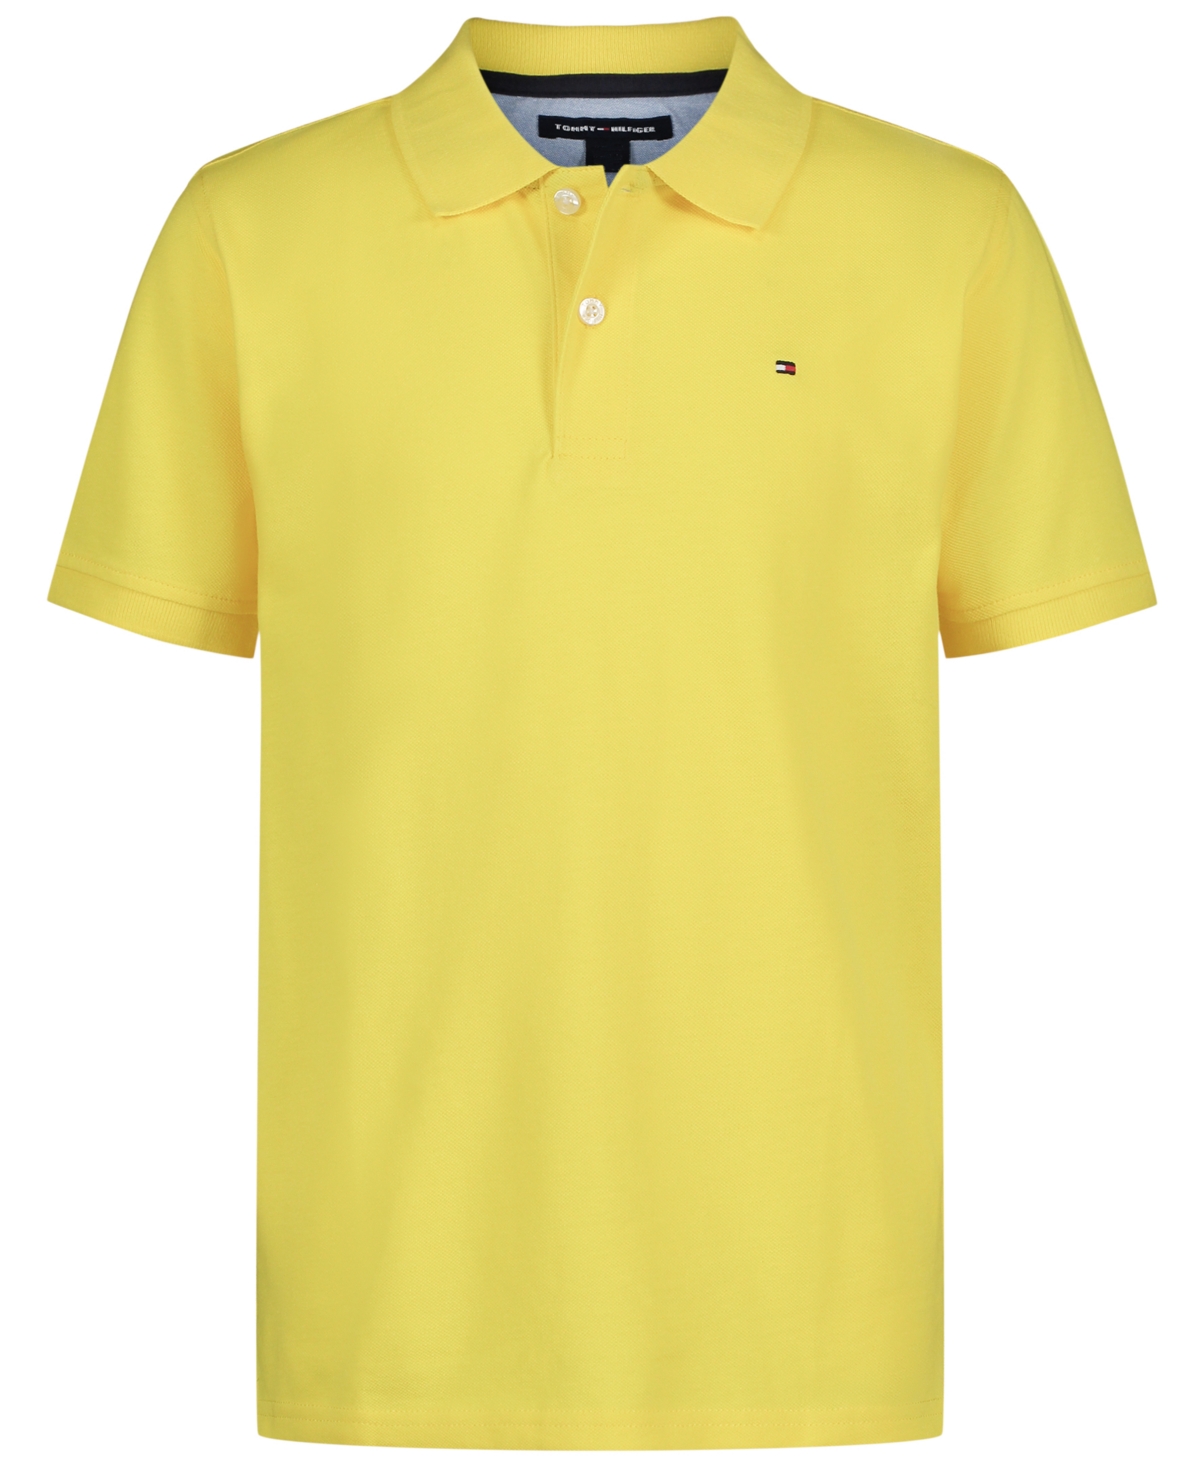 Tommy Hilfiger Kids' Toddler Boys Strech Ivy Polo Shirt In Buttercup